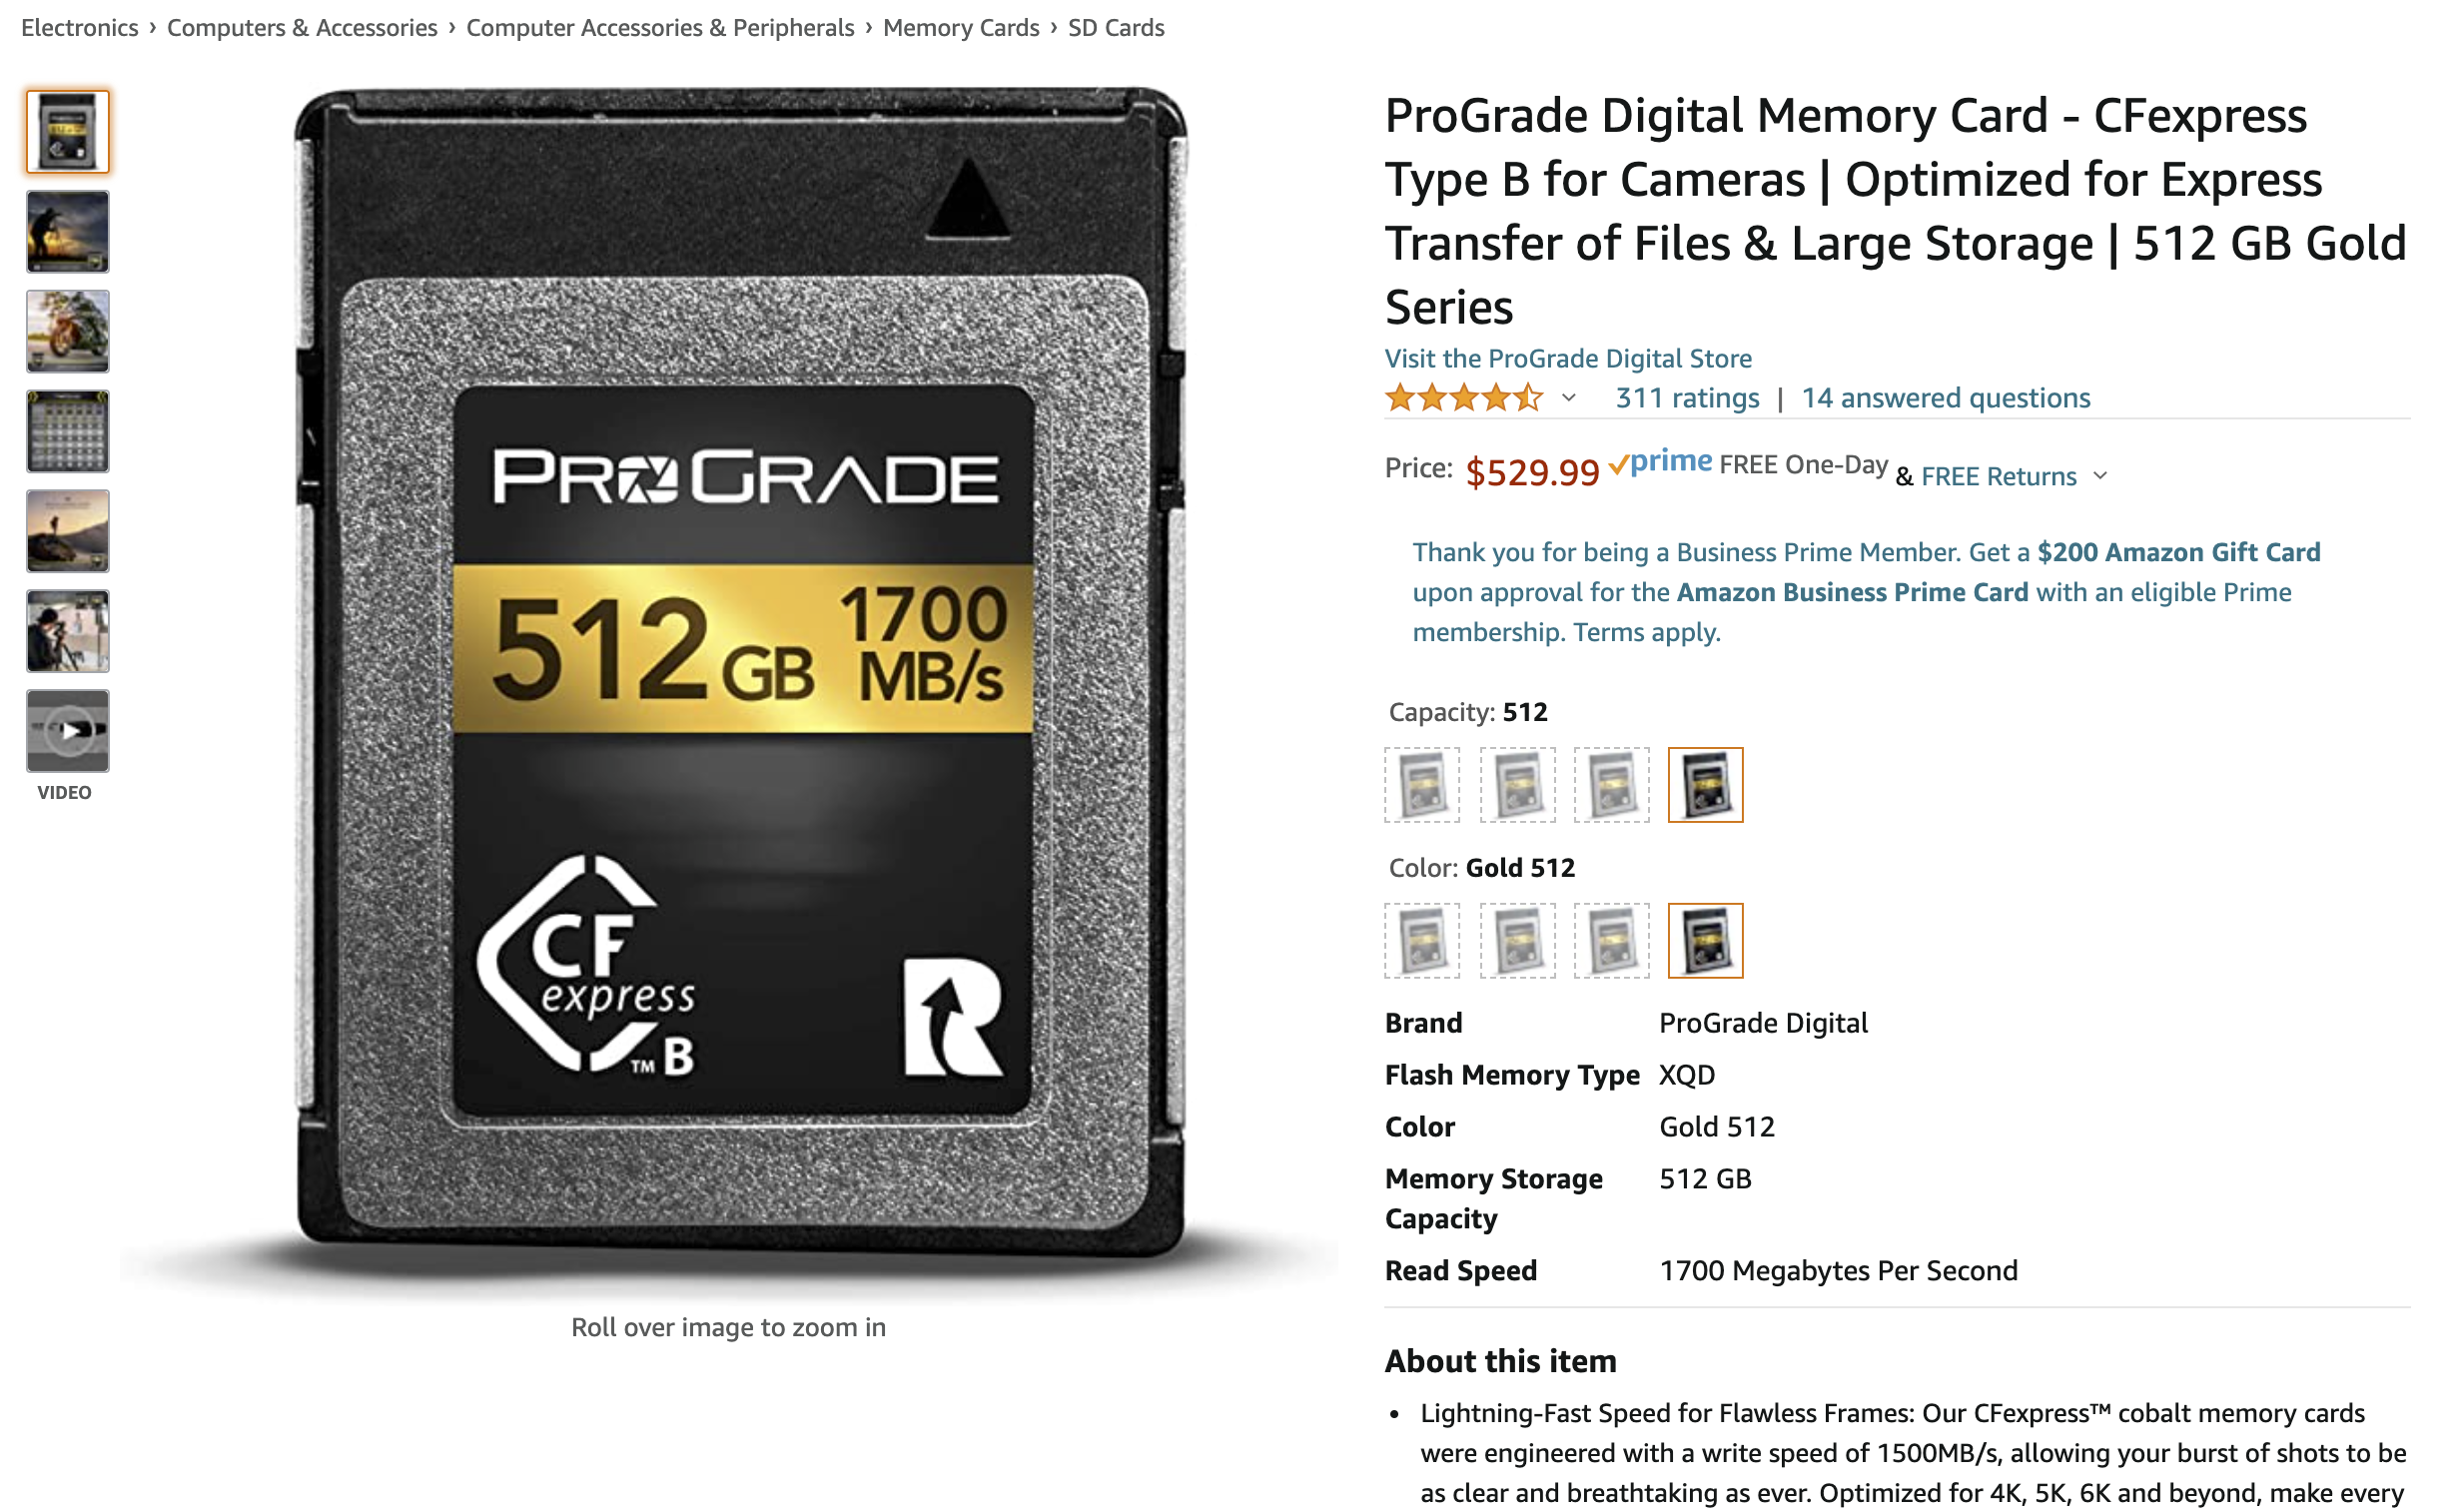 The ProGrade Digital CFExpress Type B Card Exclusive Deal Ends Soon!